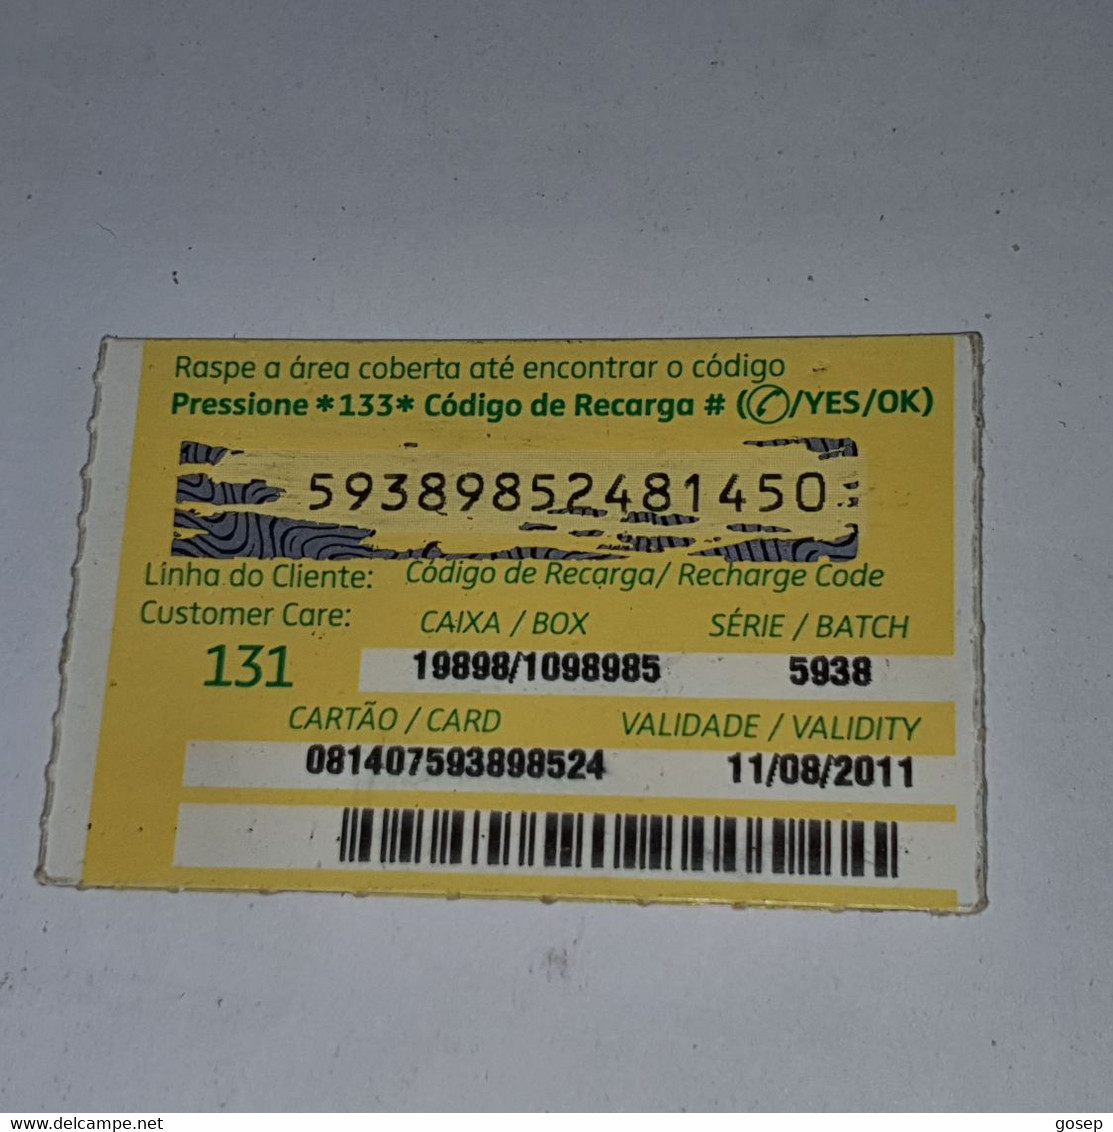 Mozambique-(MZ-MCE-REC-0003/C/2)-(8)-girl And Boy-(59389852481450)-(11/8/2011)-used Card - Moçambique